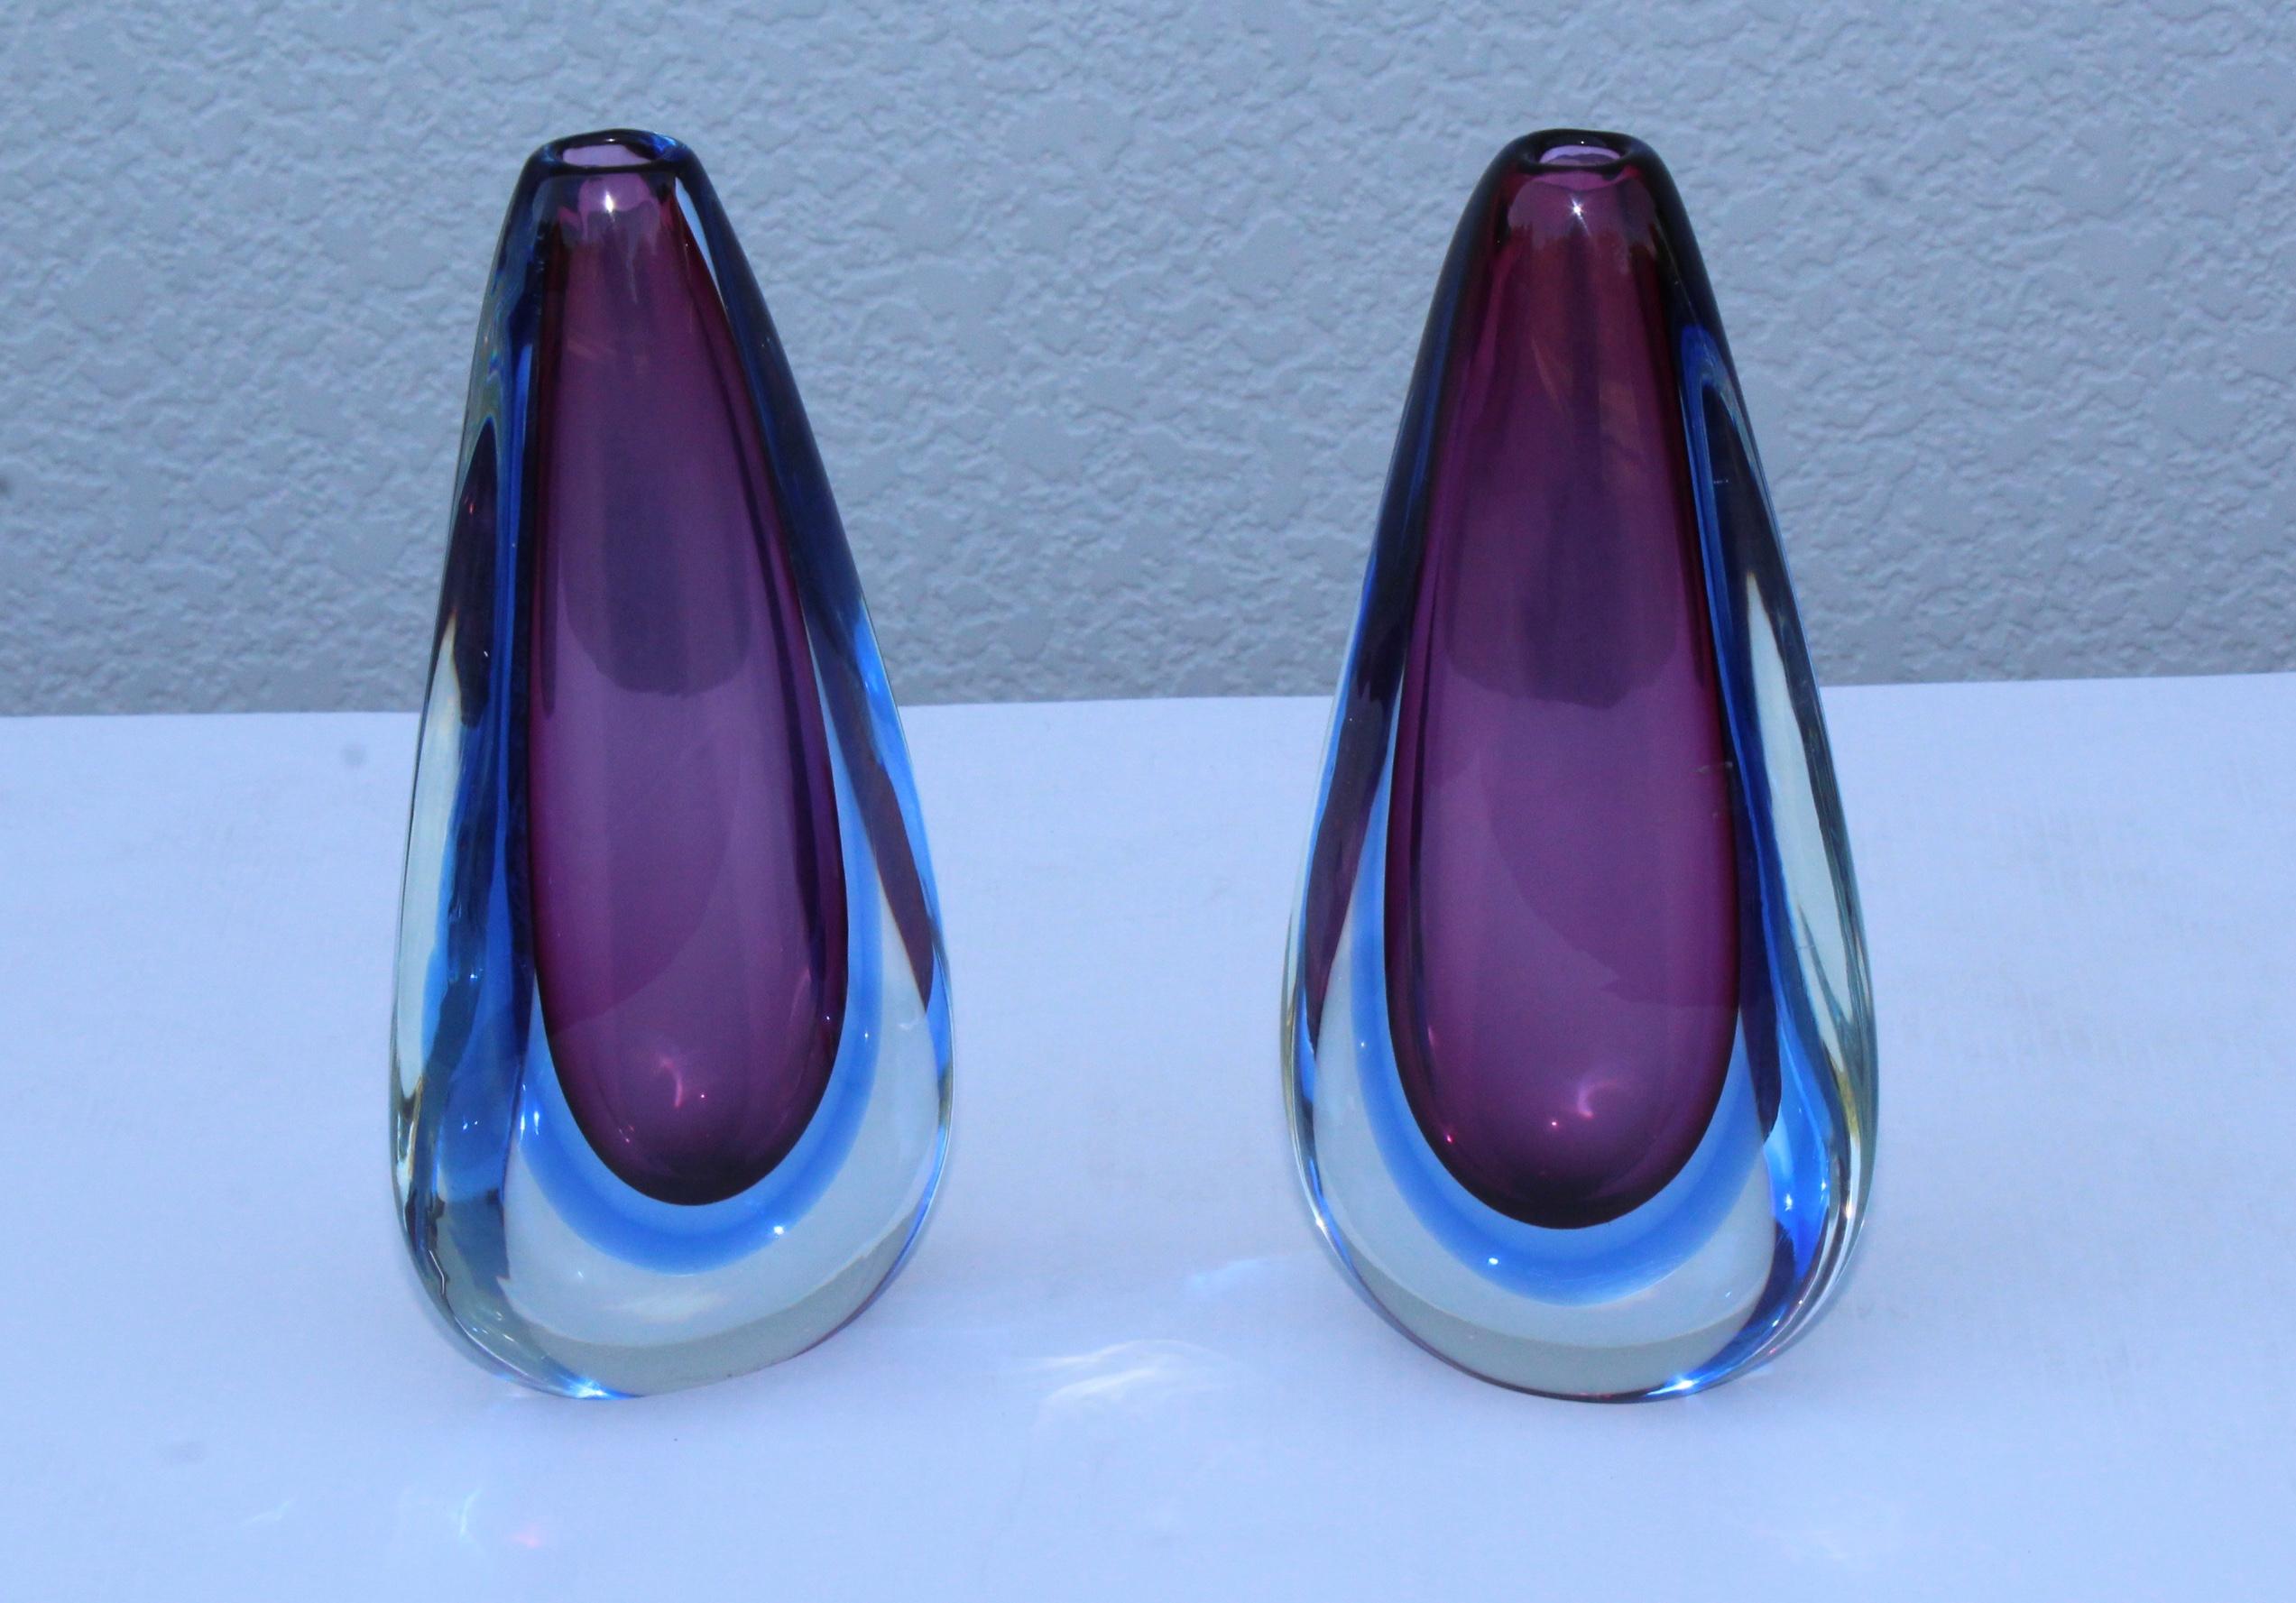 1970s Sommerso Murano vases by Oball. in very good vintage condition.